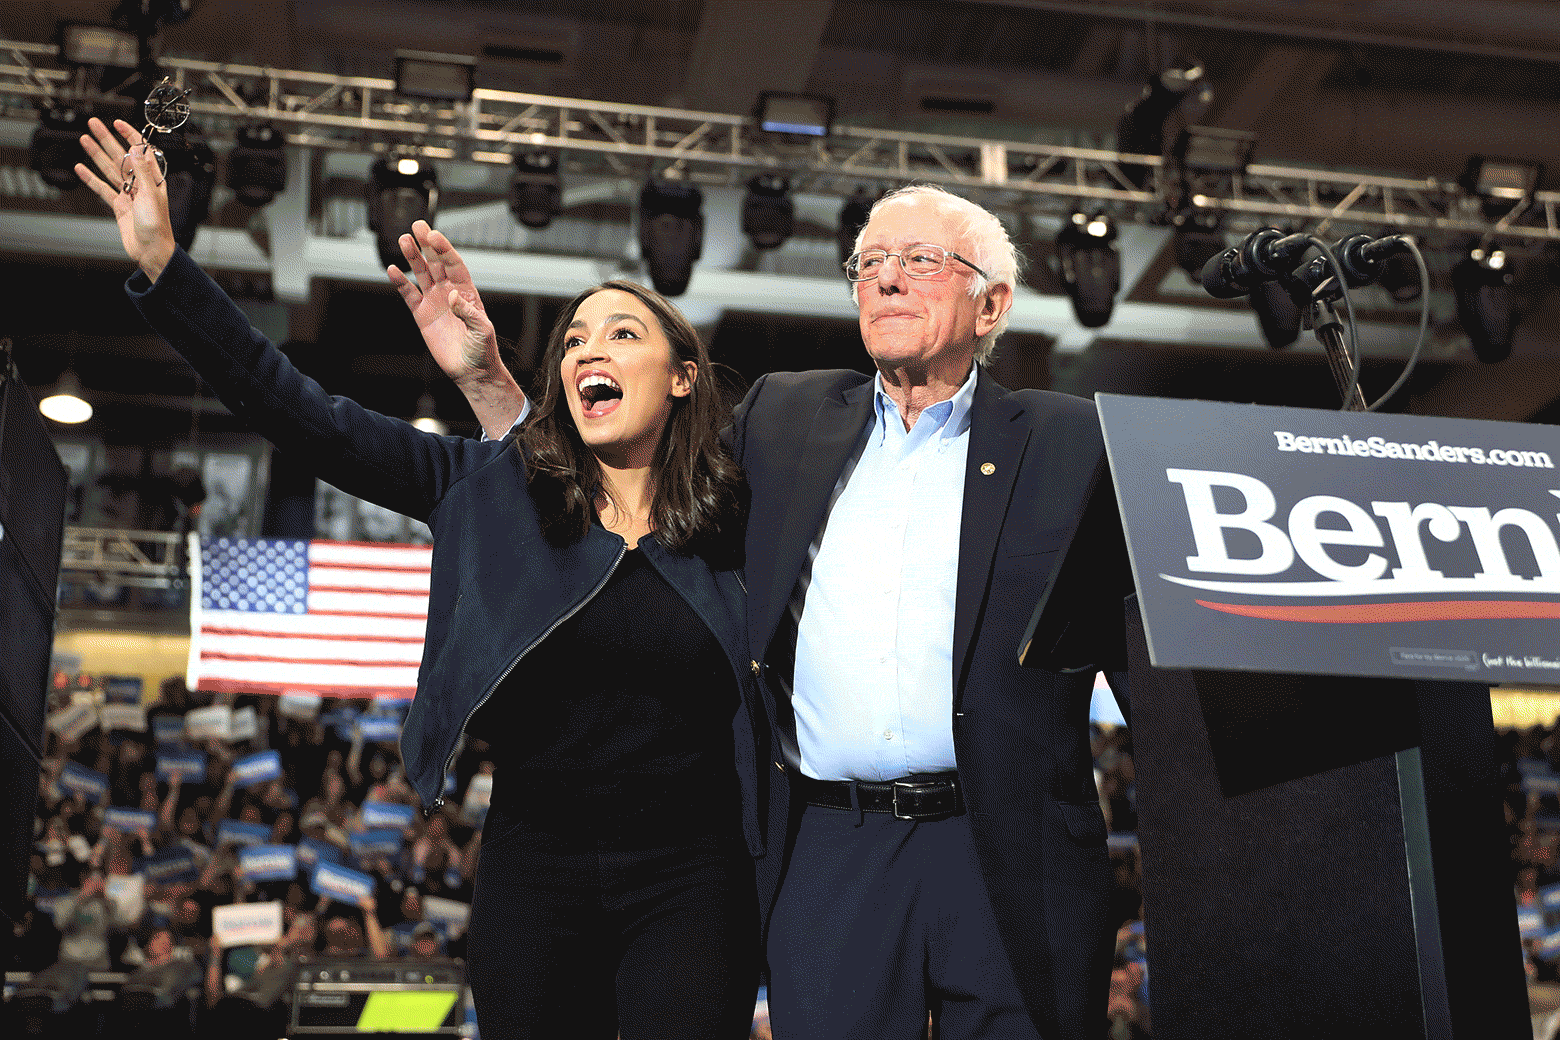 AOC and Bernie Sanders stand next to each other onstage in an arena and wave to the crowd as an illustrated version of Biden sidles up beside them.